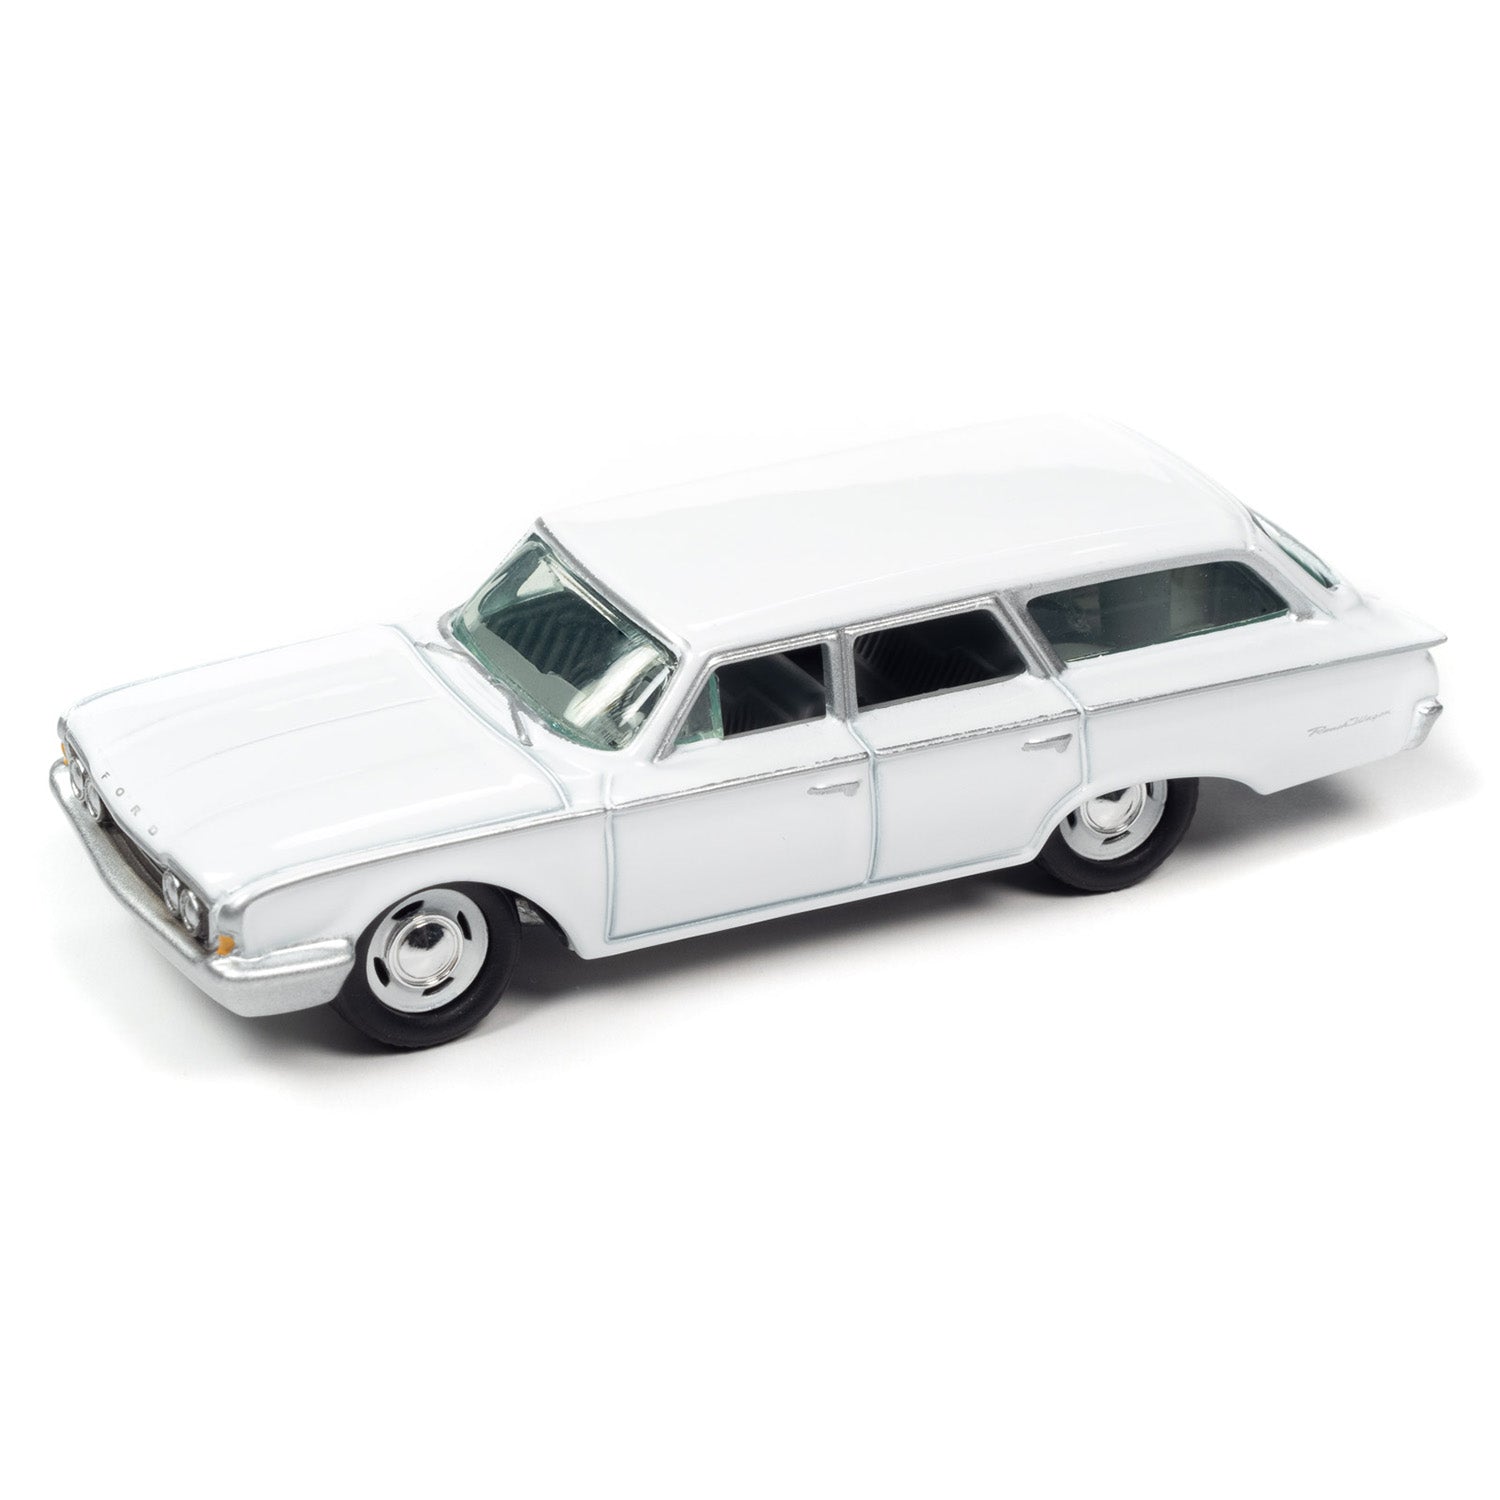 James Bond Ford Ranch Wagon Model Car - From Russia With Love By